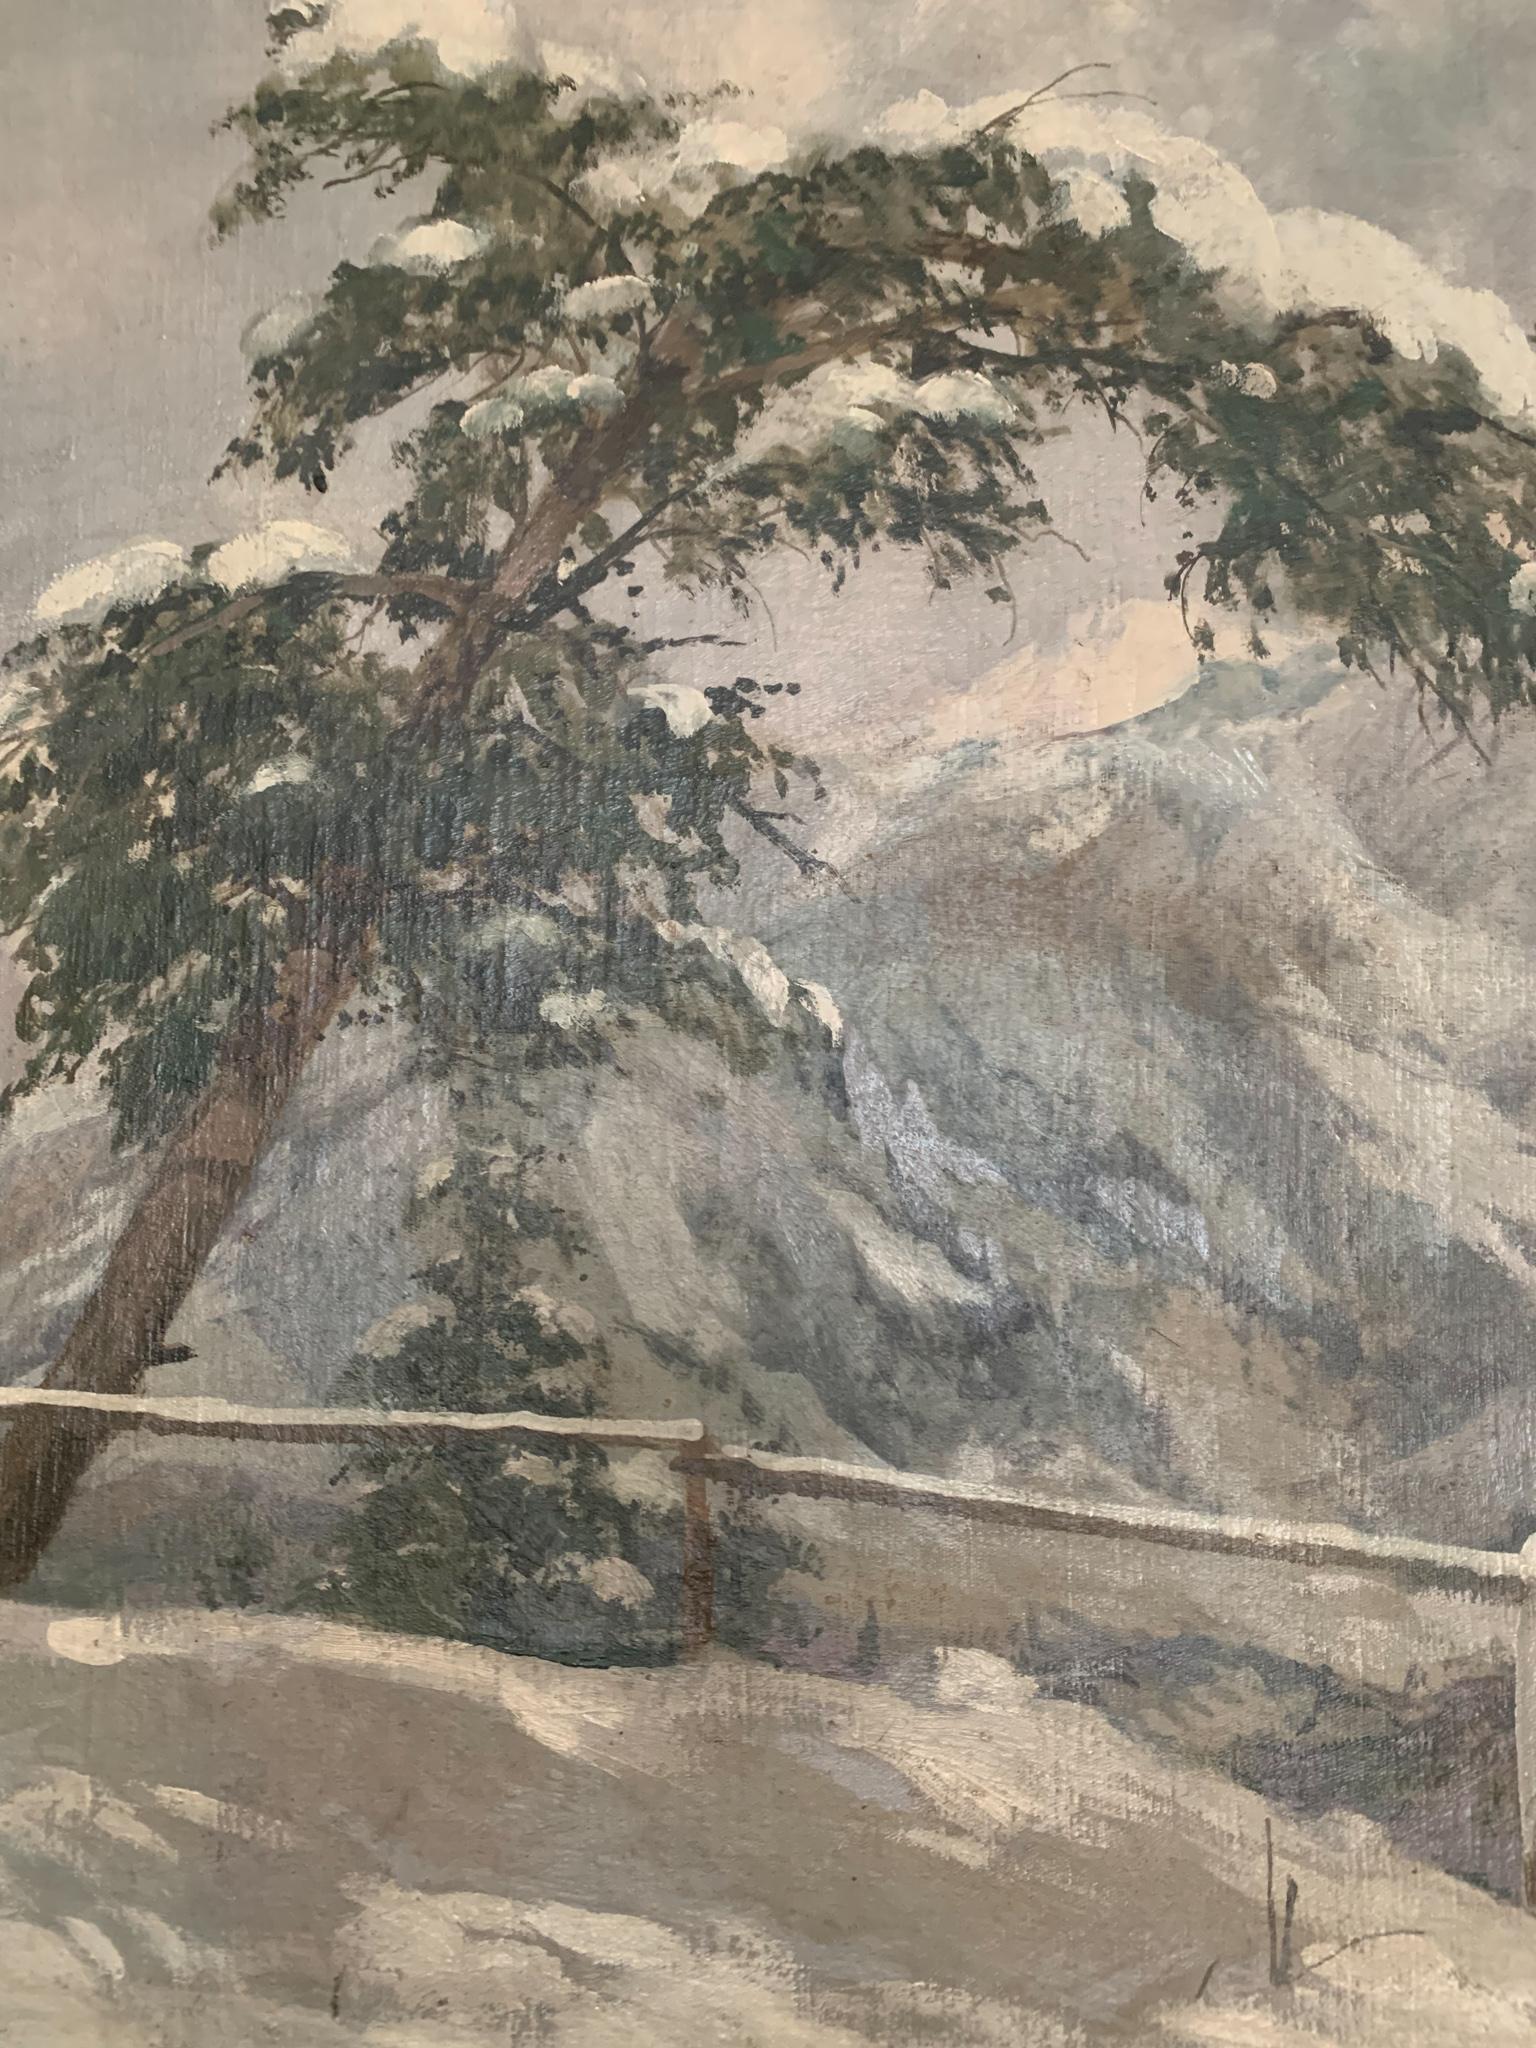 Italian Oil Painting on Canvas by Alberto Dressler 'Snowy Landscape' from 1944 For Sale 7